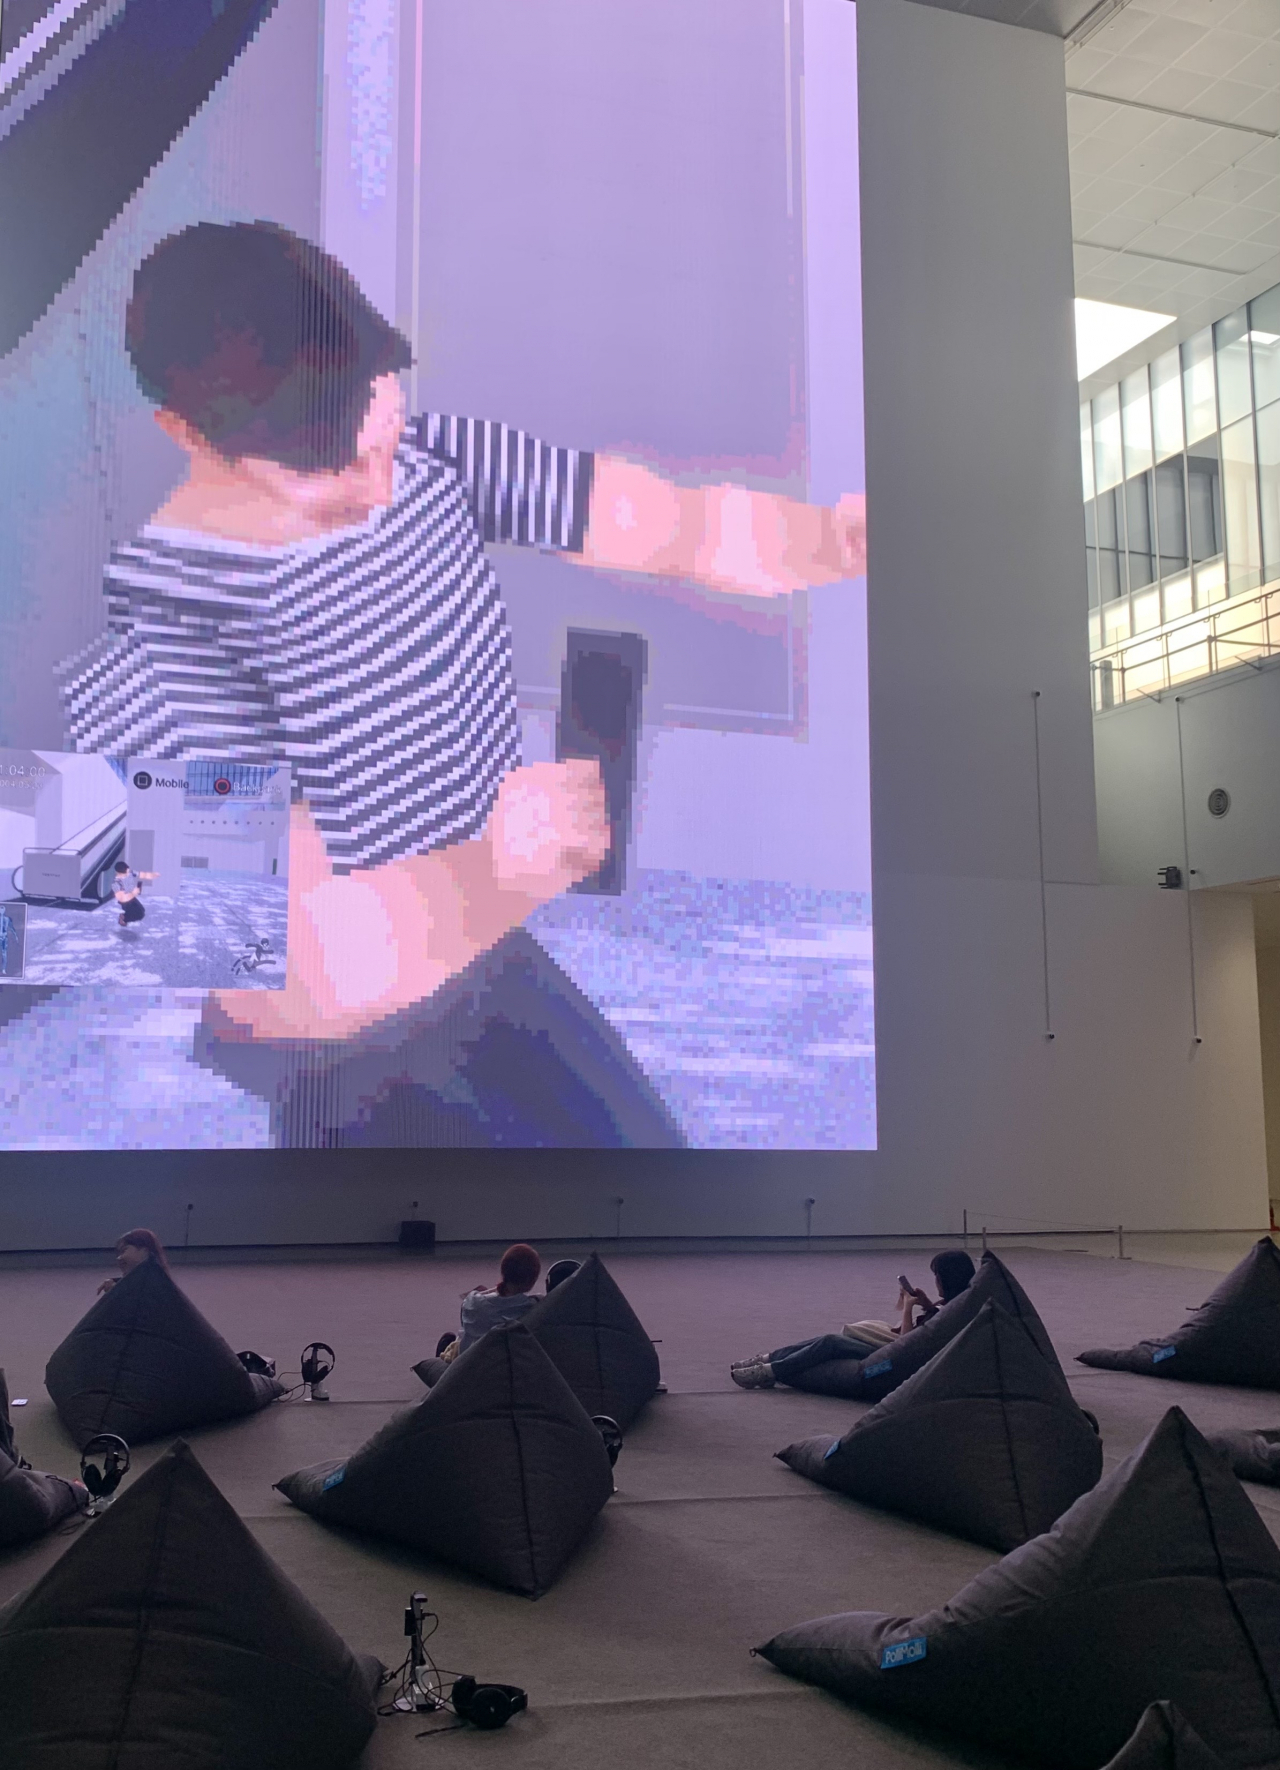 Visitors sit on bean bag chairs and watch Kim Heecheon's 